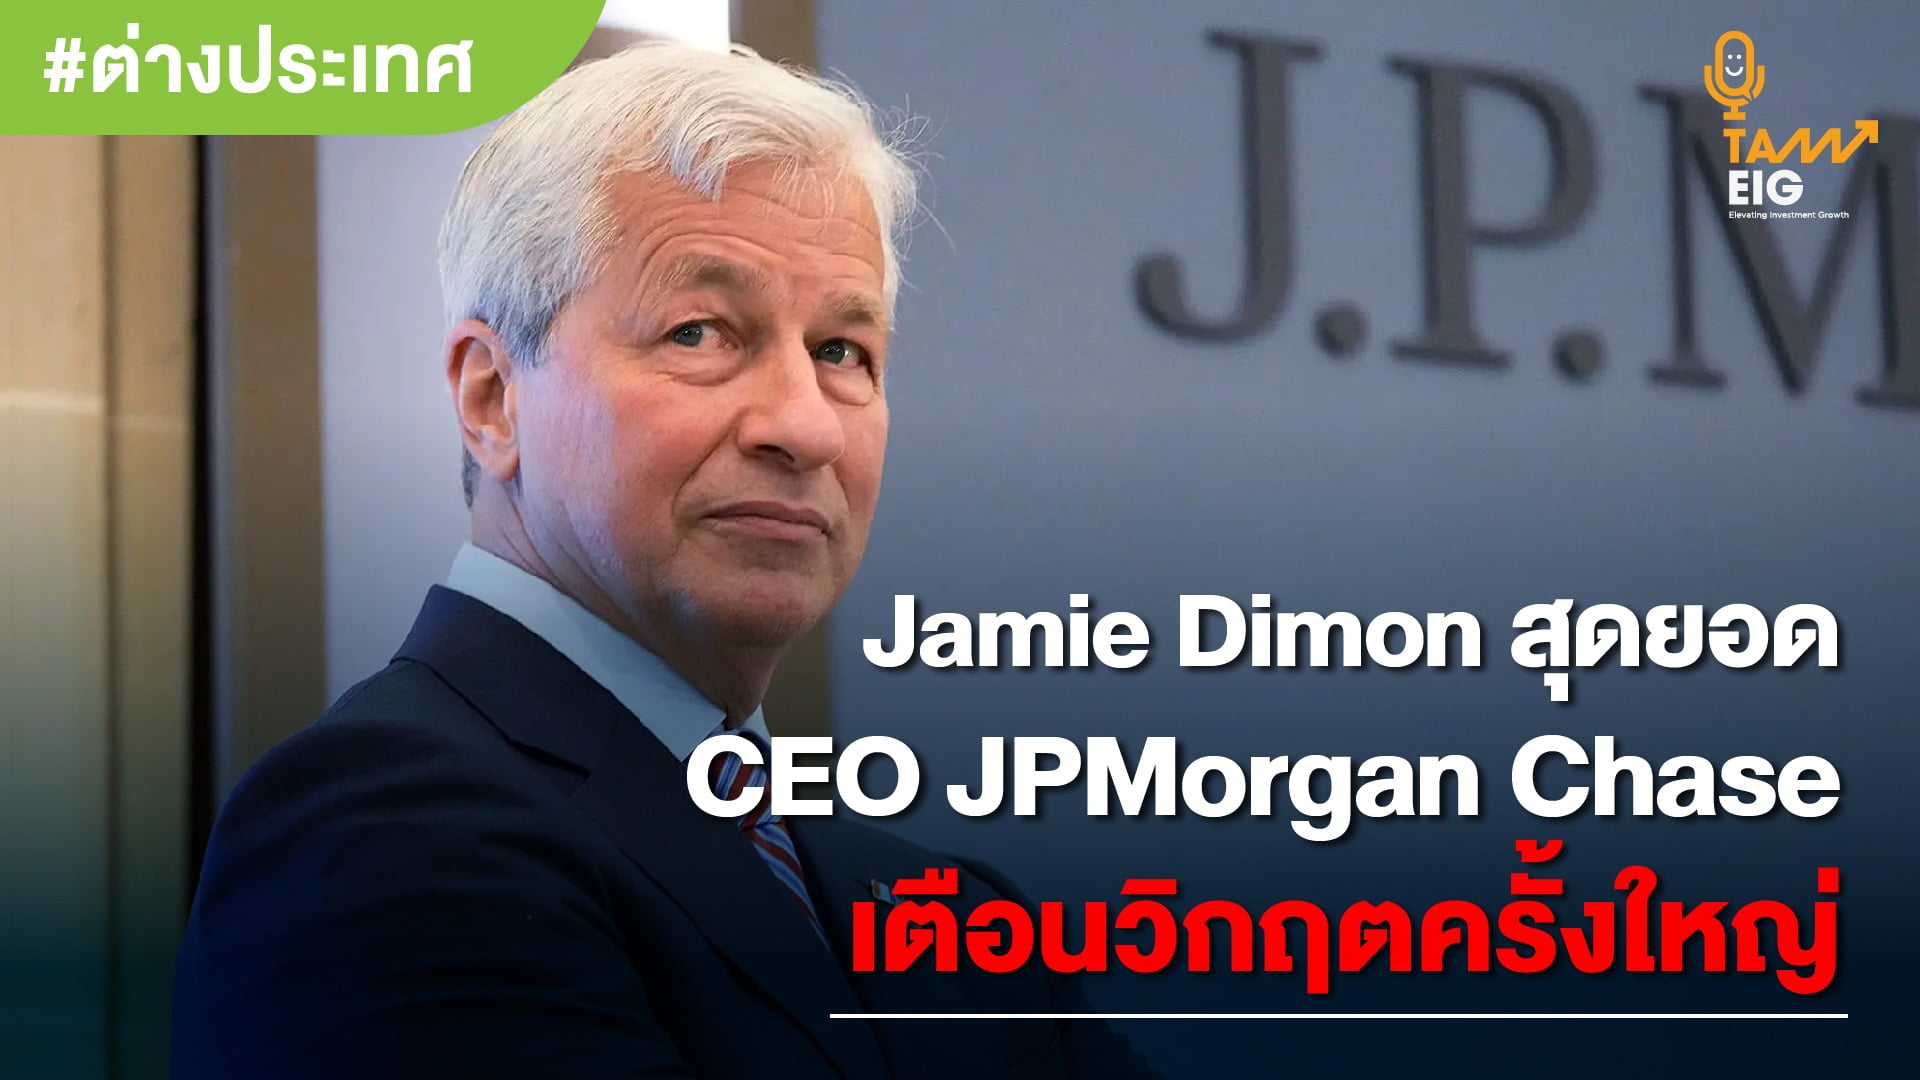 Jamie Dimon sees ‘storm clouds’ ahead for U.S. economy later this year